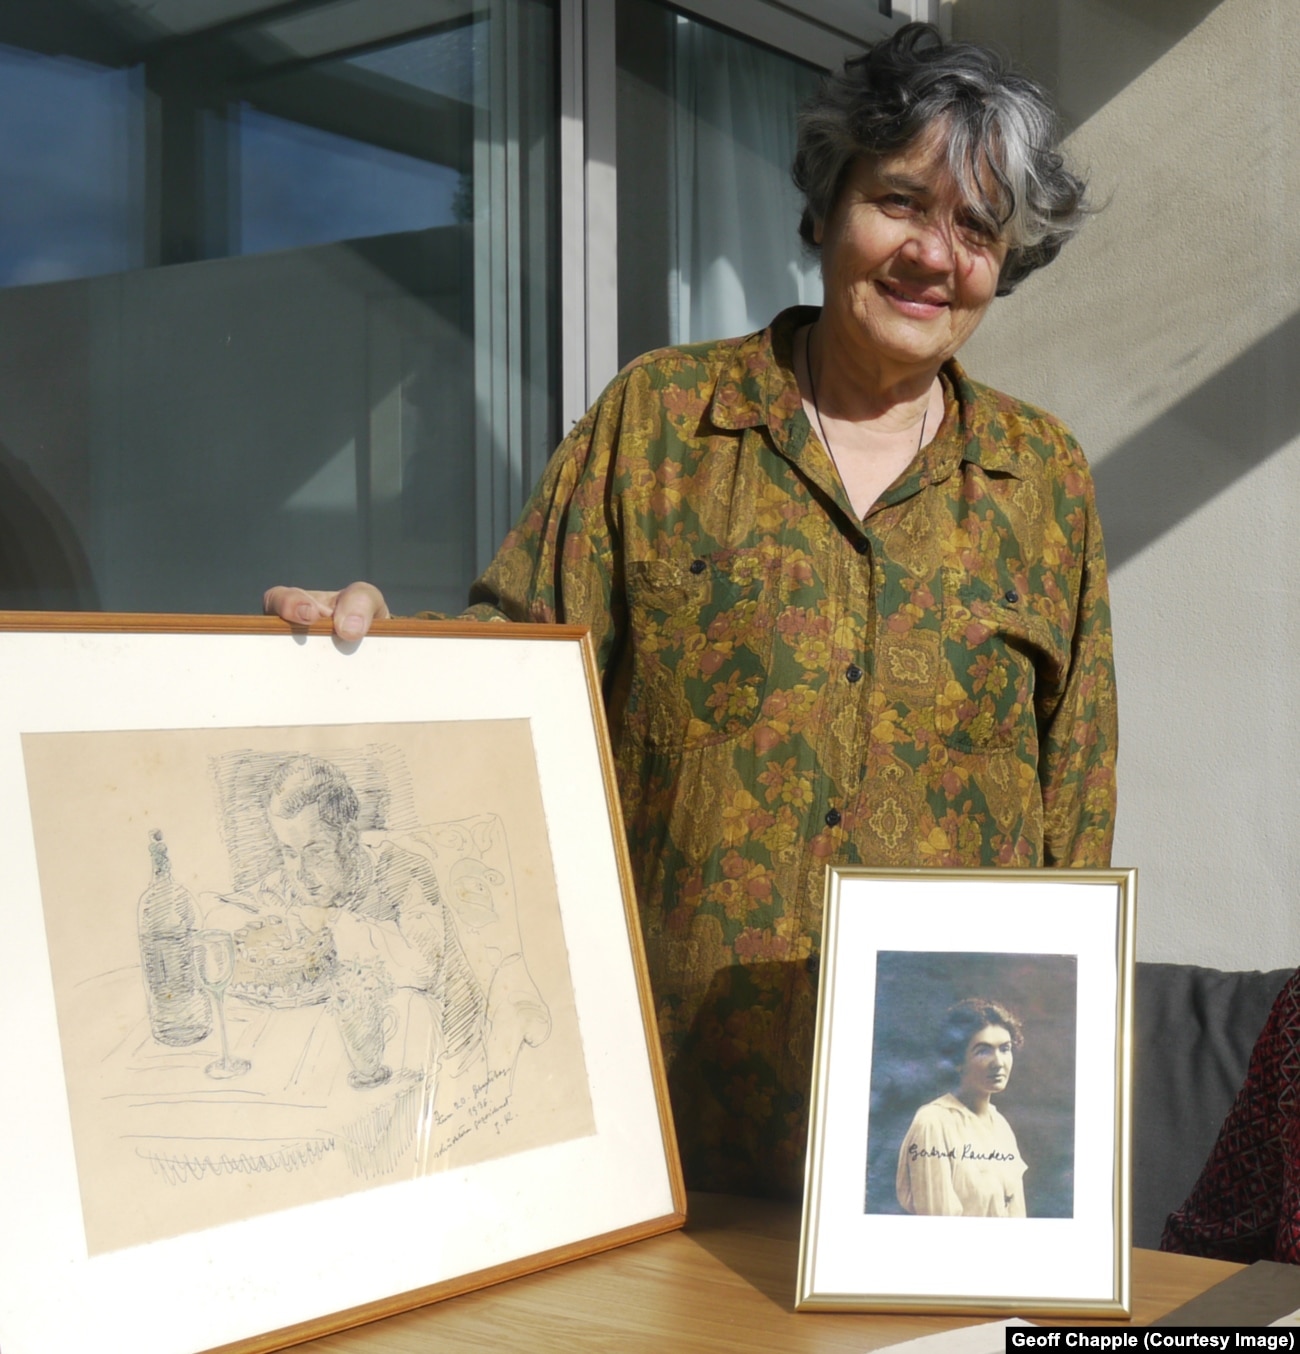 Miriam Kauders with a pencil sketch of her father, Cornelius, as drawn by Gertrud Kauders.